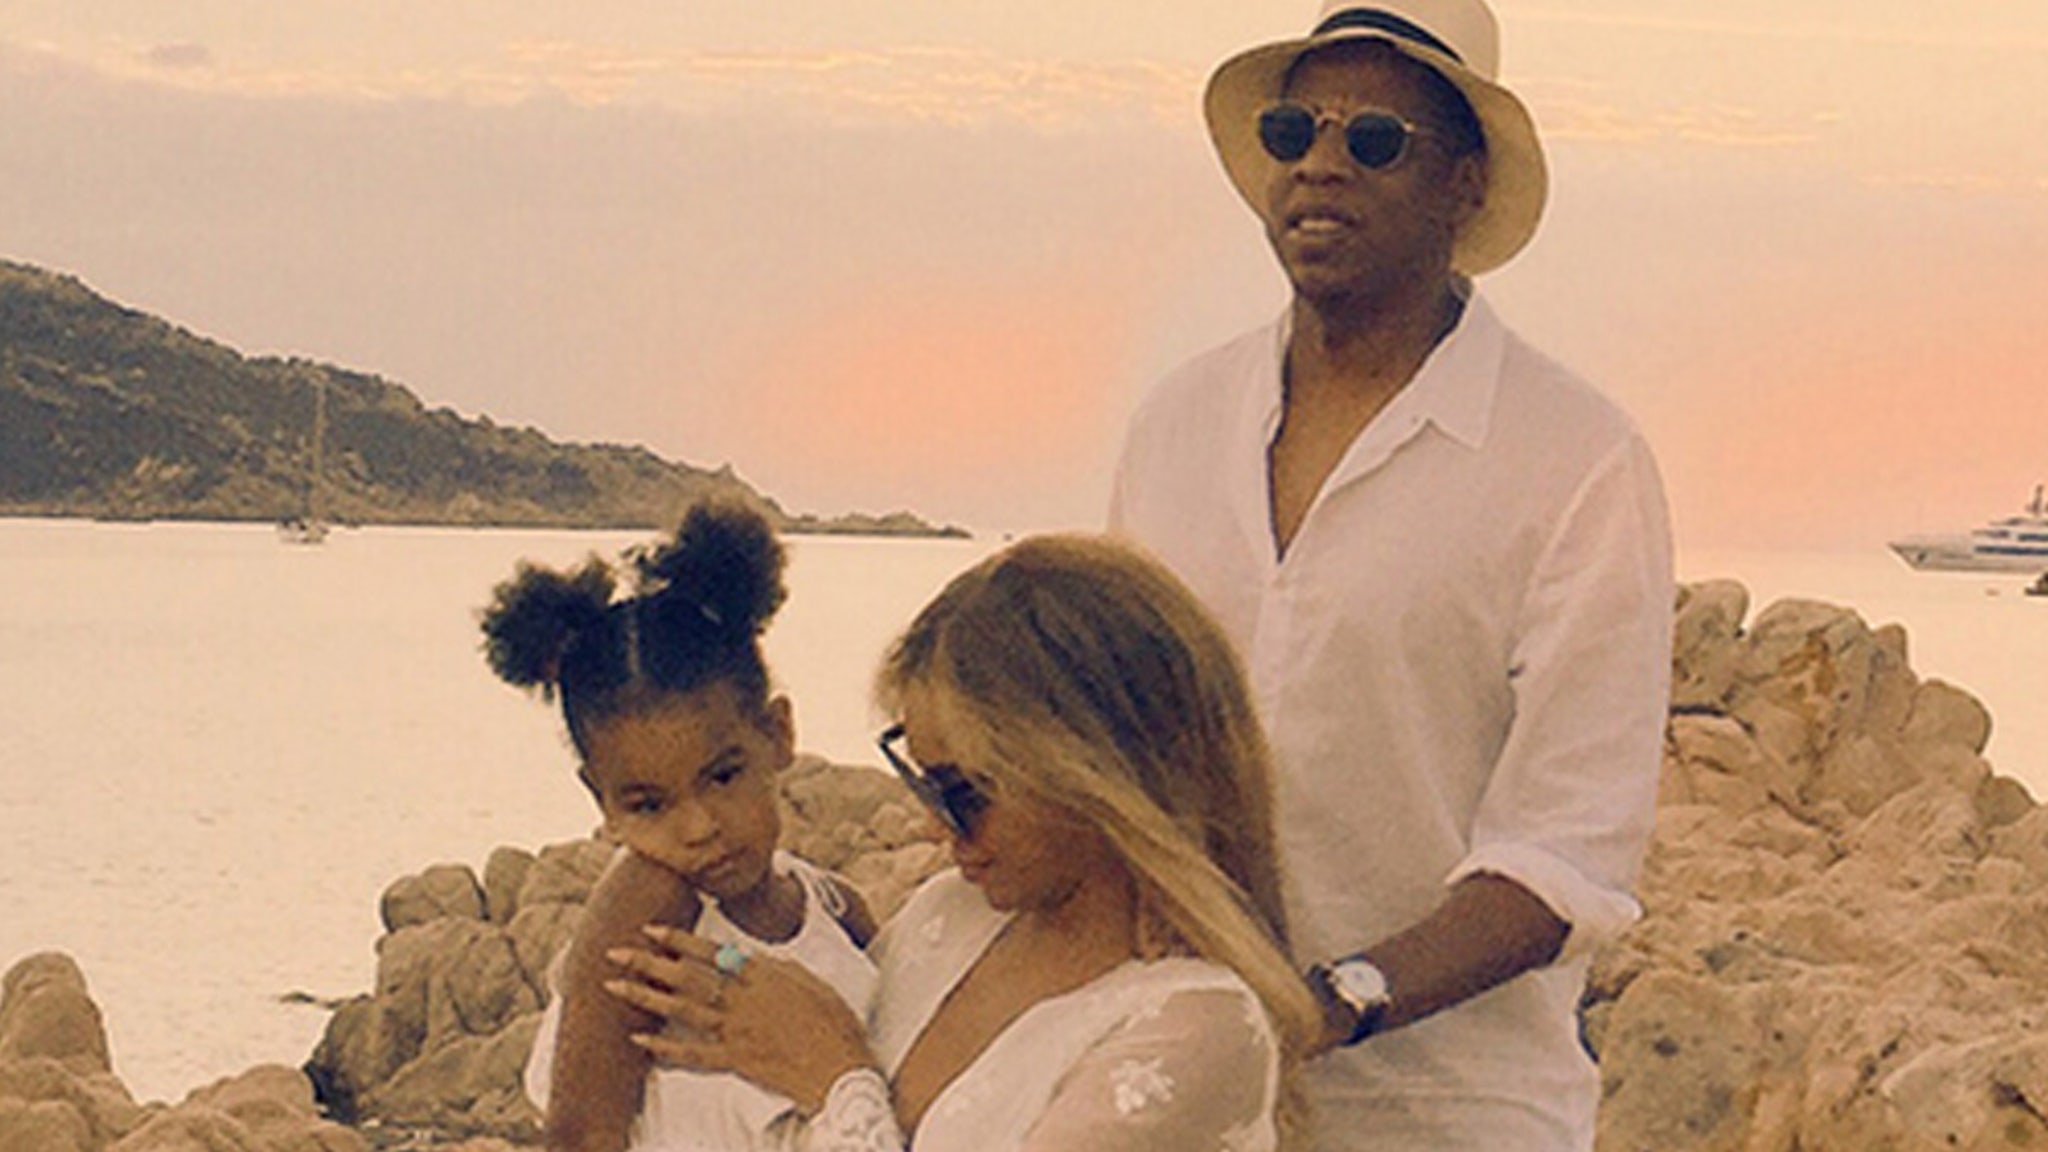 Living The Good Life Beyonce Shares New Vacation Photos And Video With Blue Ivy